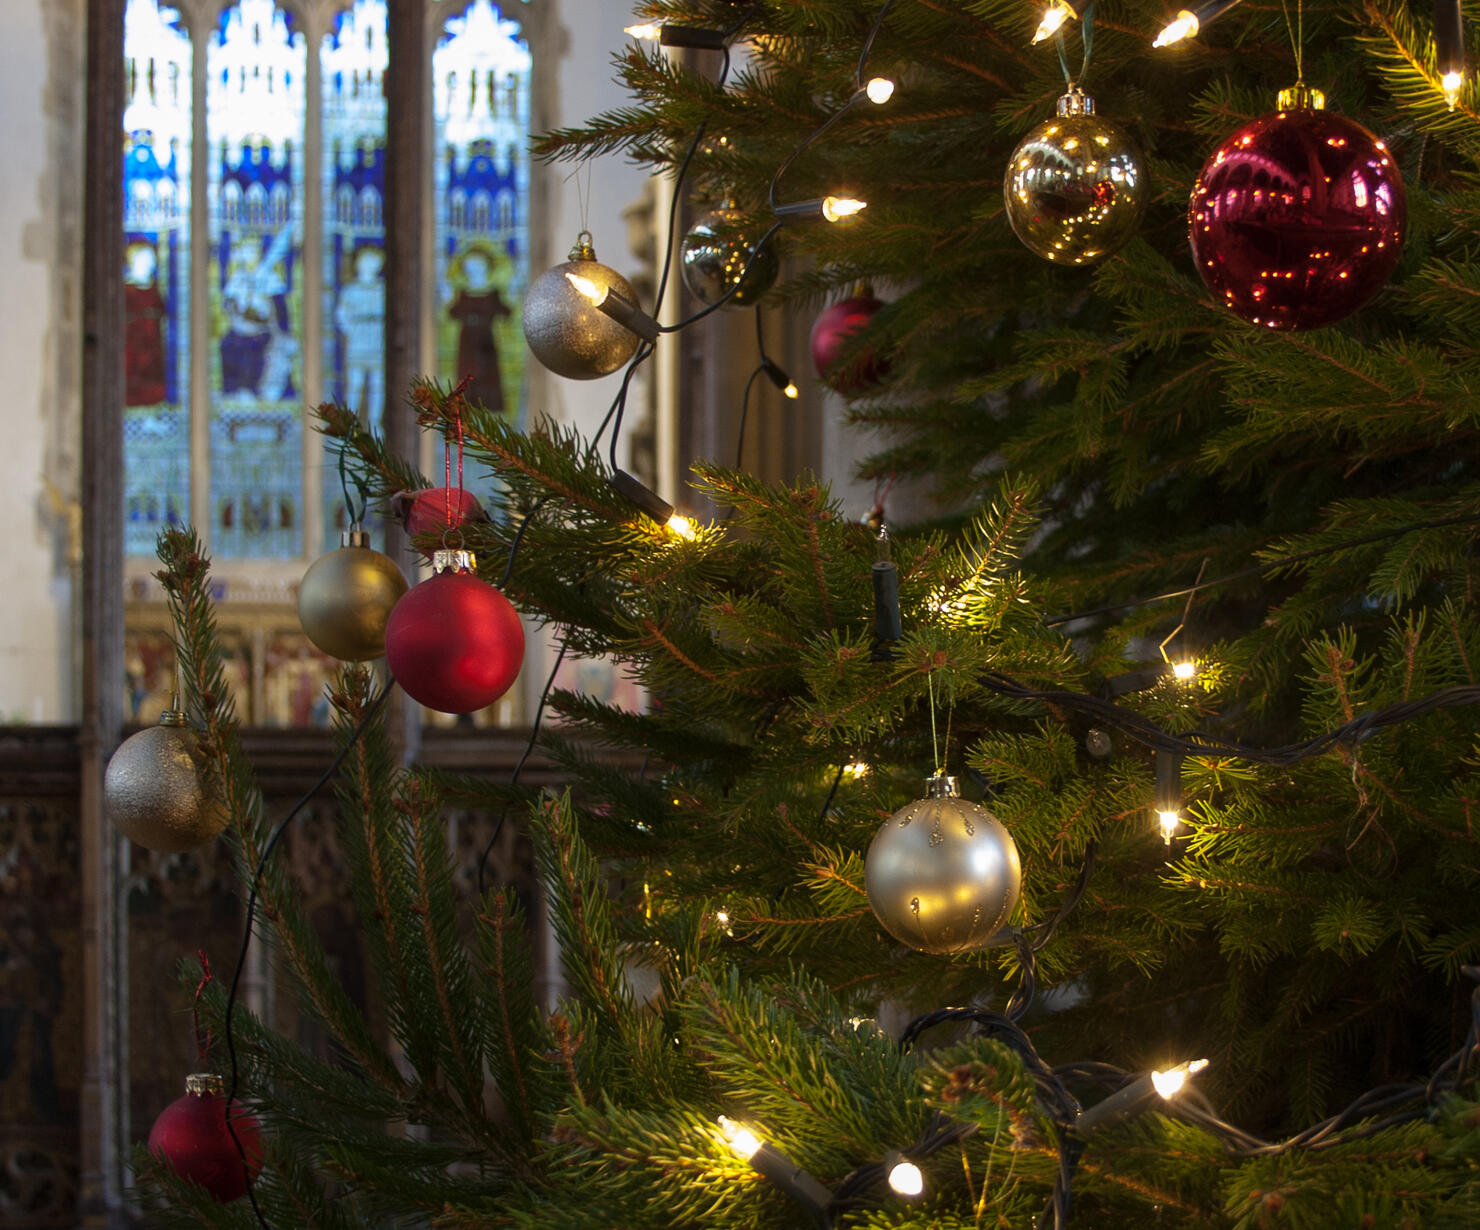 Decorated Christmas tree in an English church